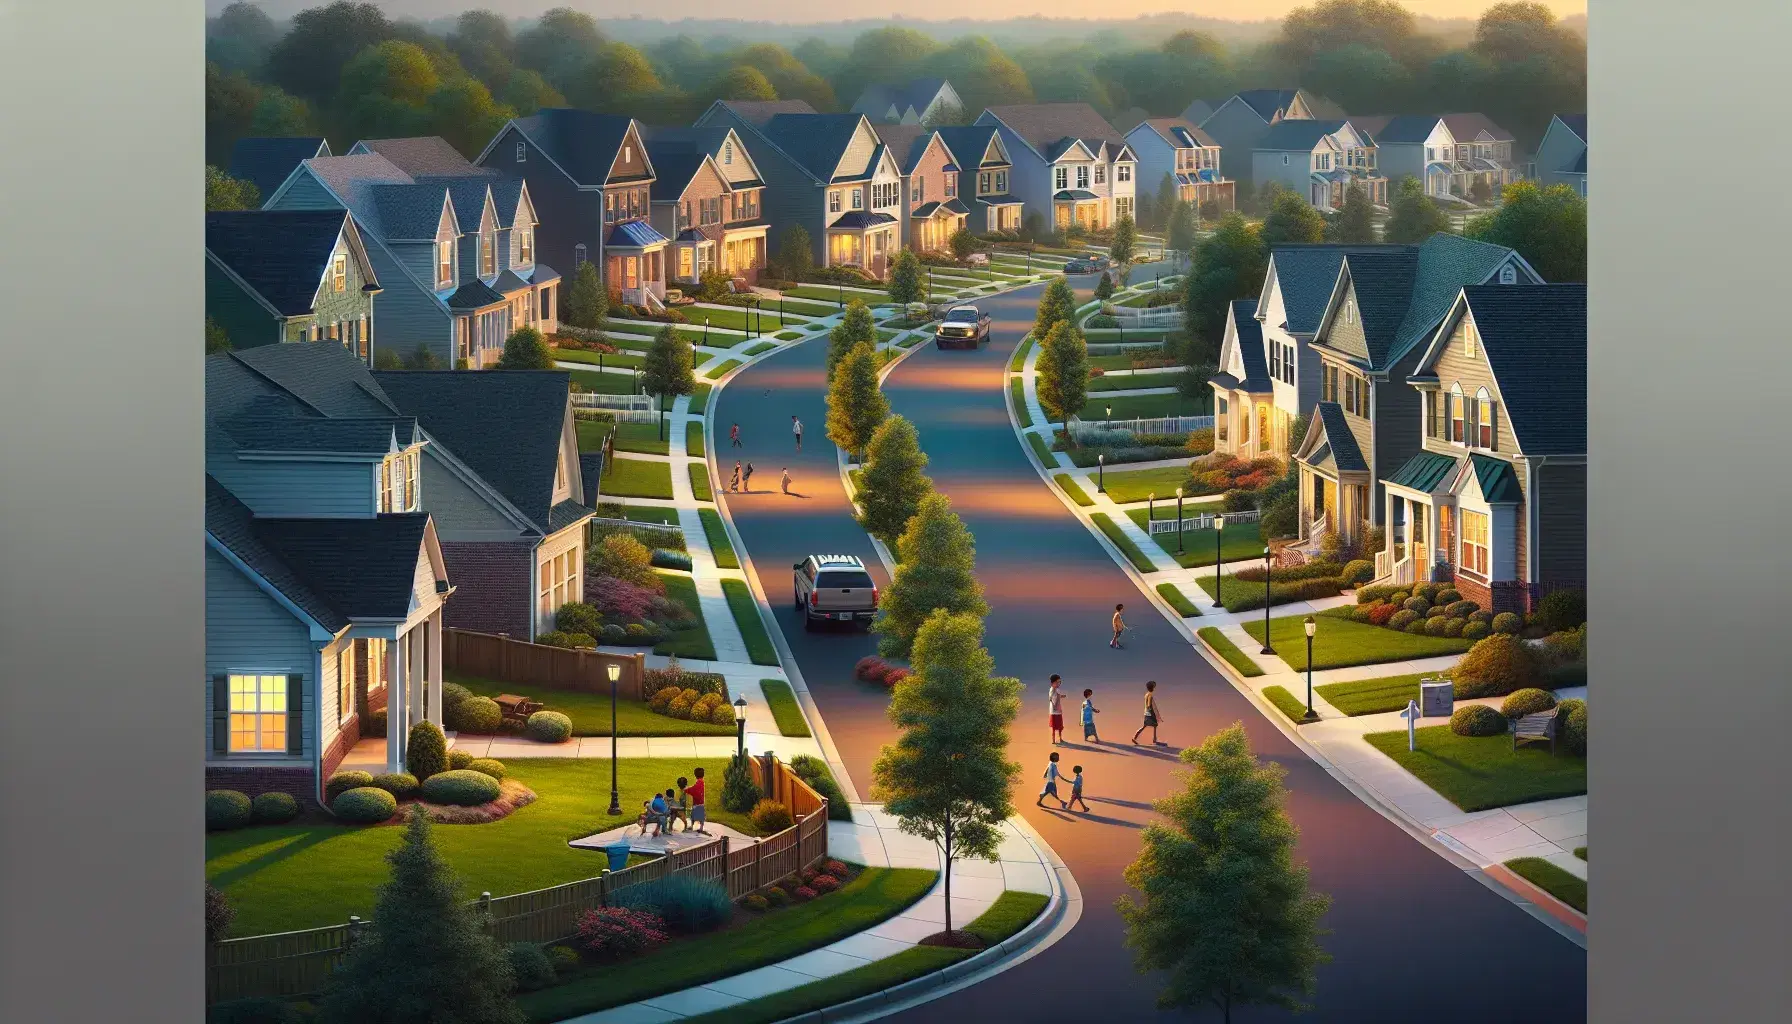 Suburban neighborhood at dusk with tree-lined street, diverse families enjoying outdoor activities, and homes under a gradient sunset sky.